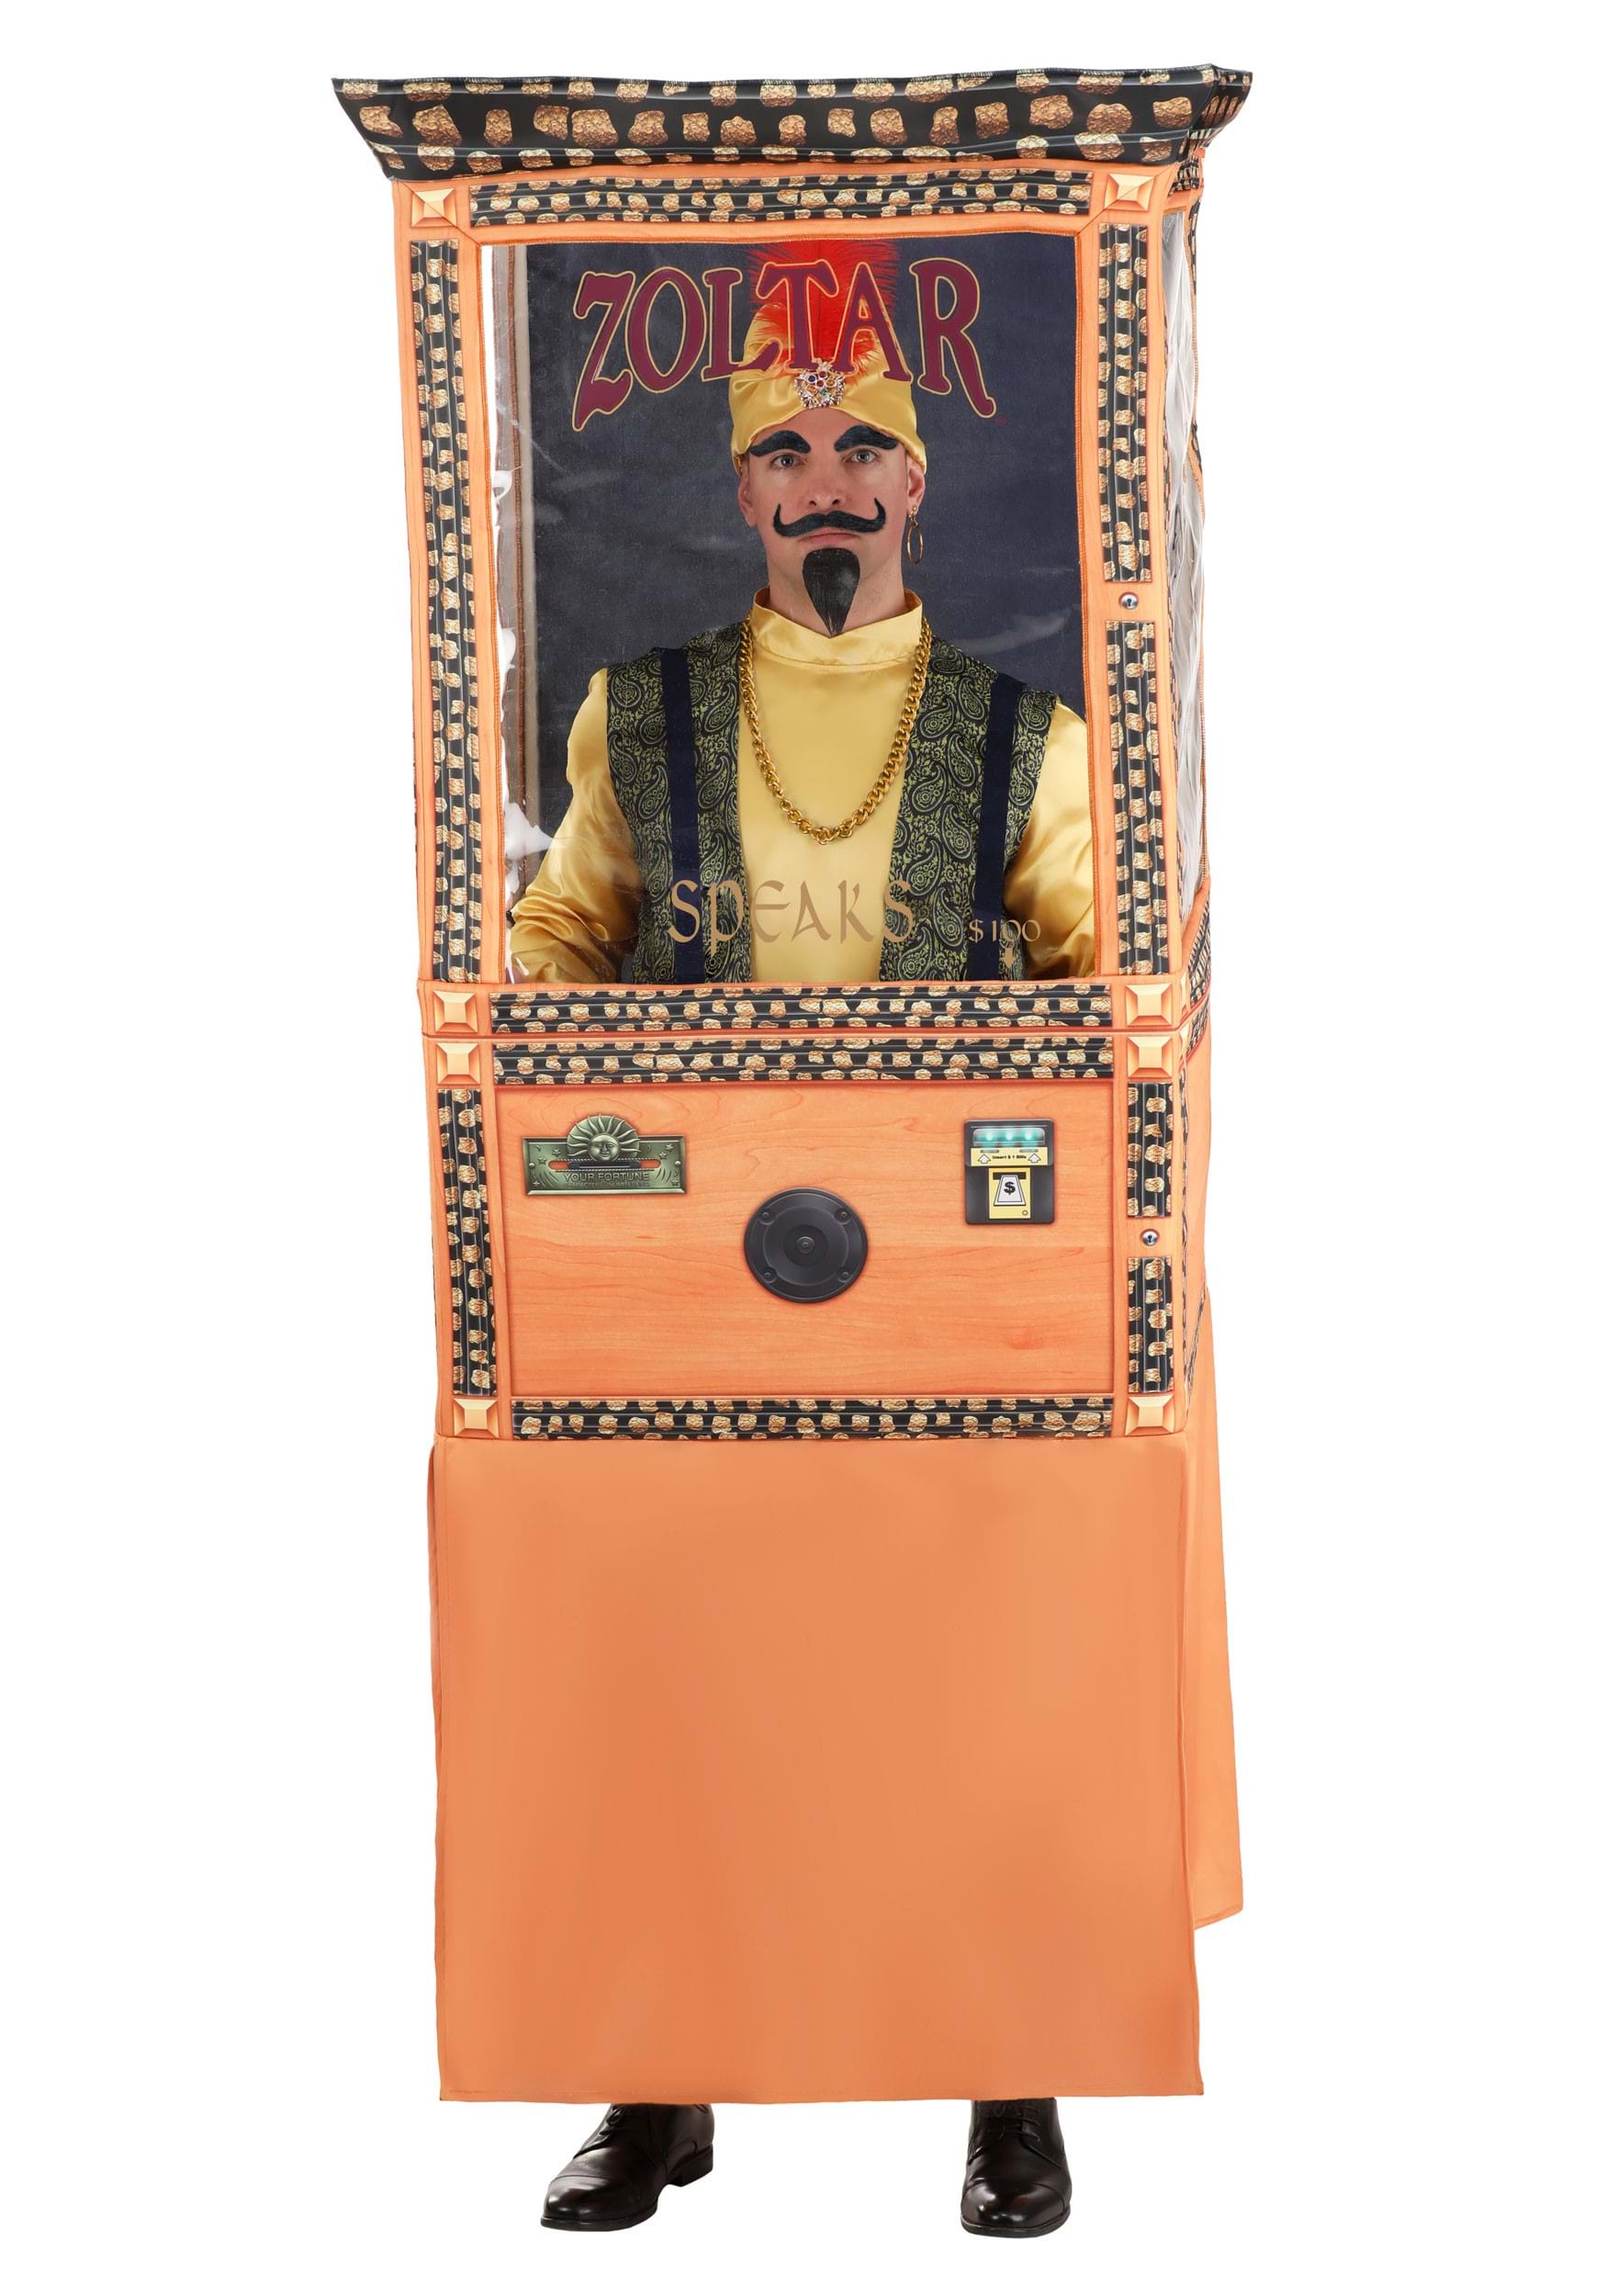 Image of Zoltar Speaks Booth Adult Costume ID FUN3649AD-S